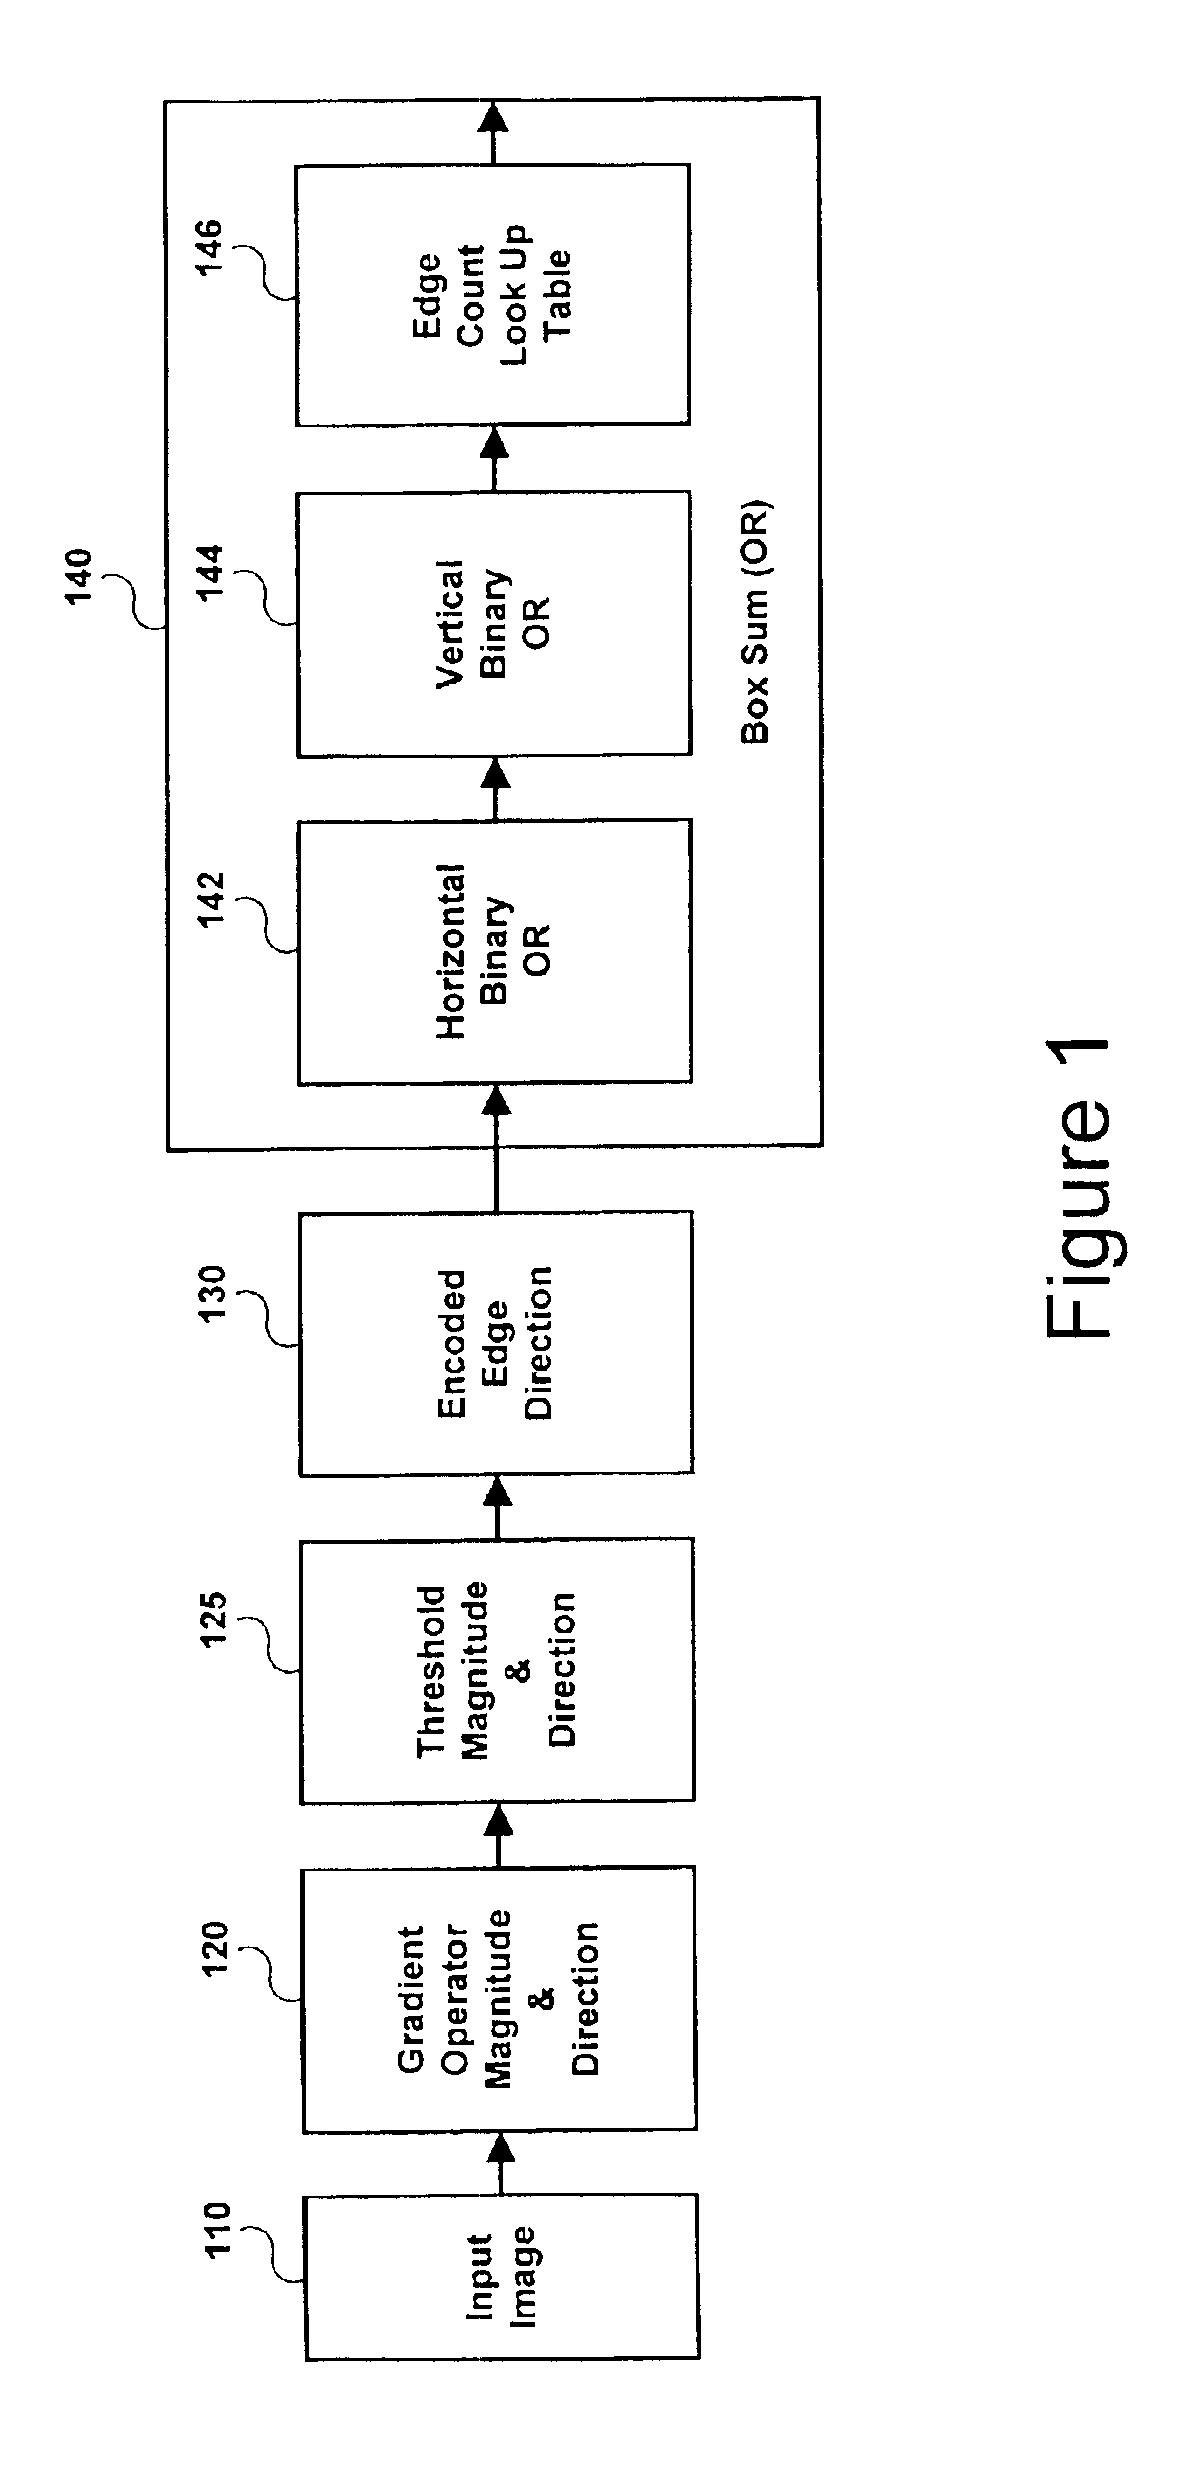 Method and system for identifying objects in an image